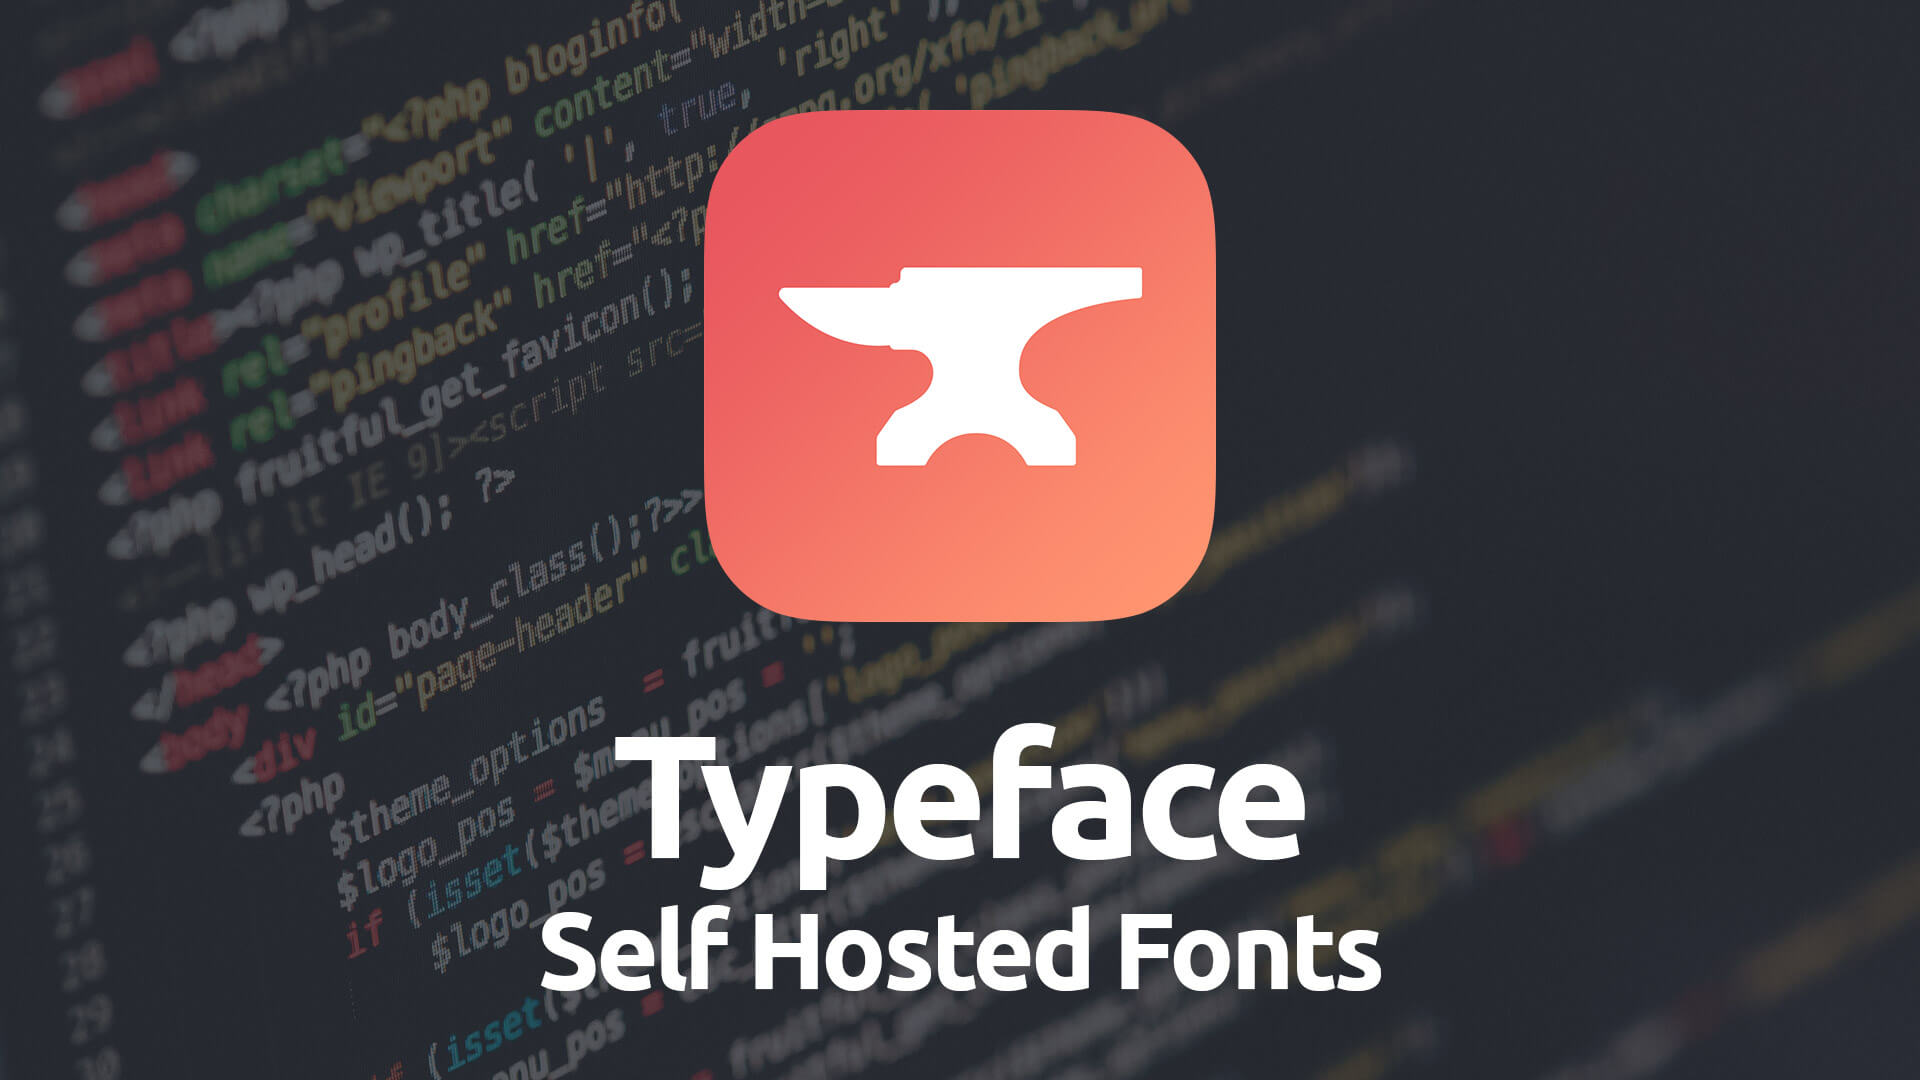 Add and manage your own fonts